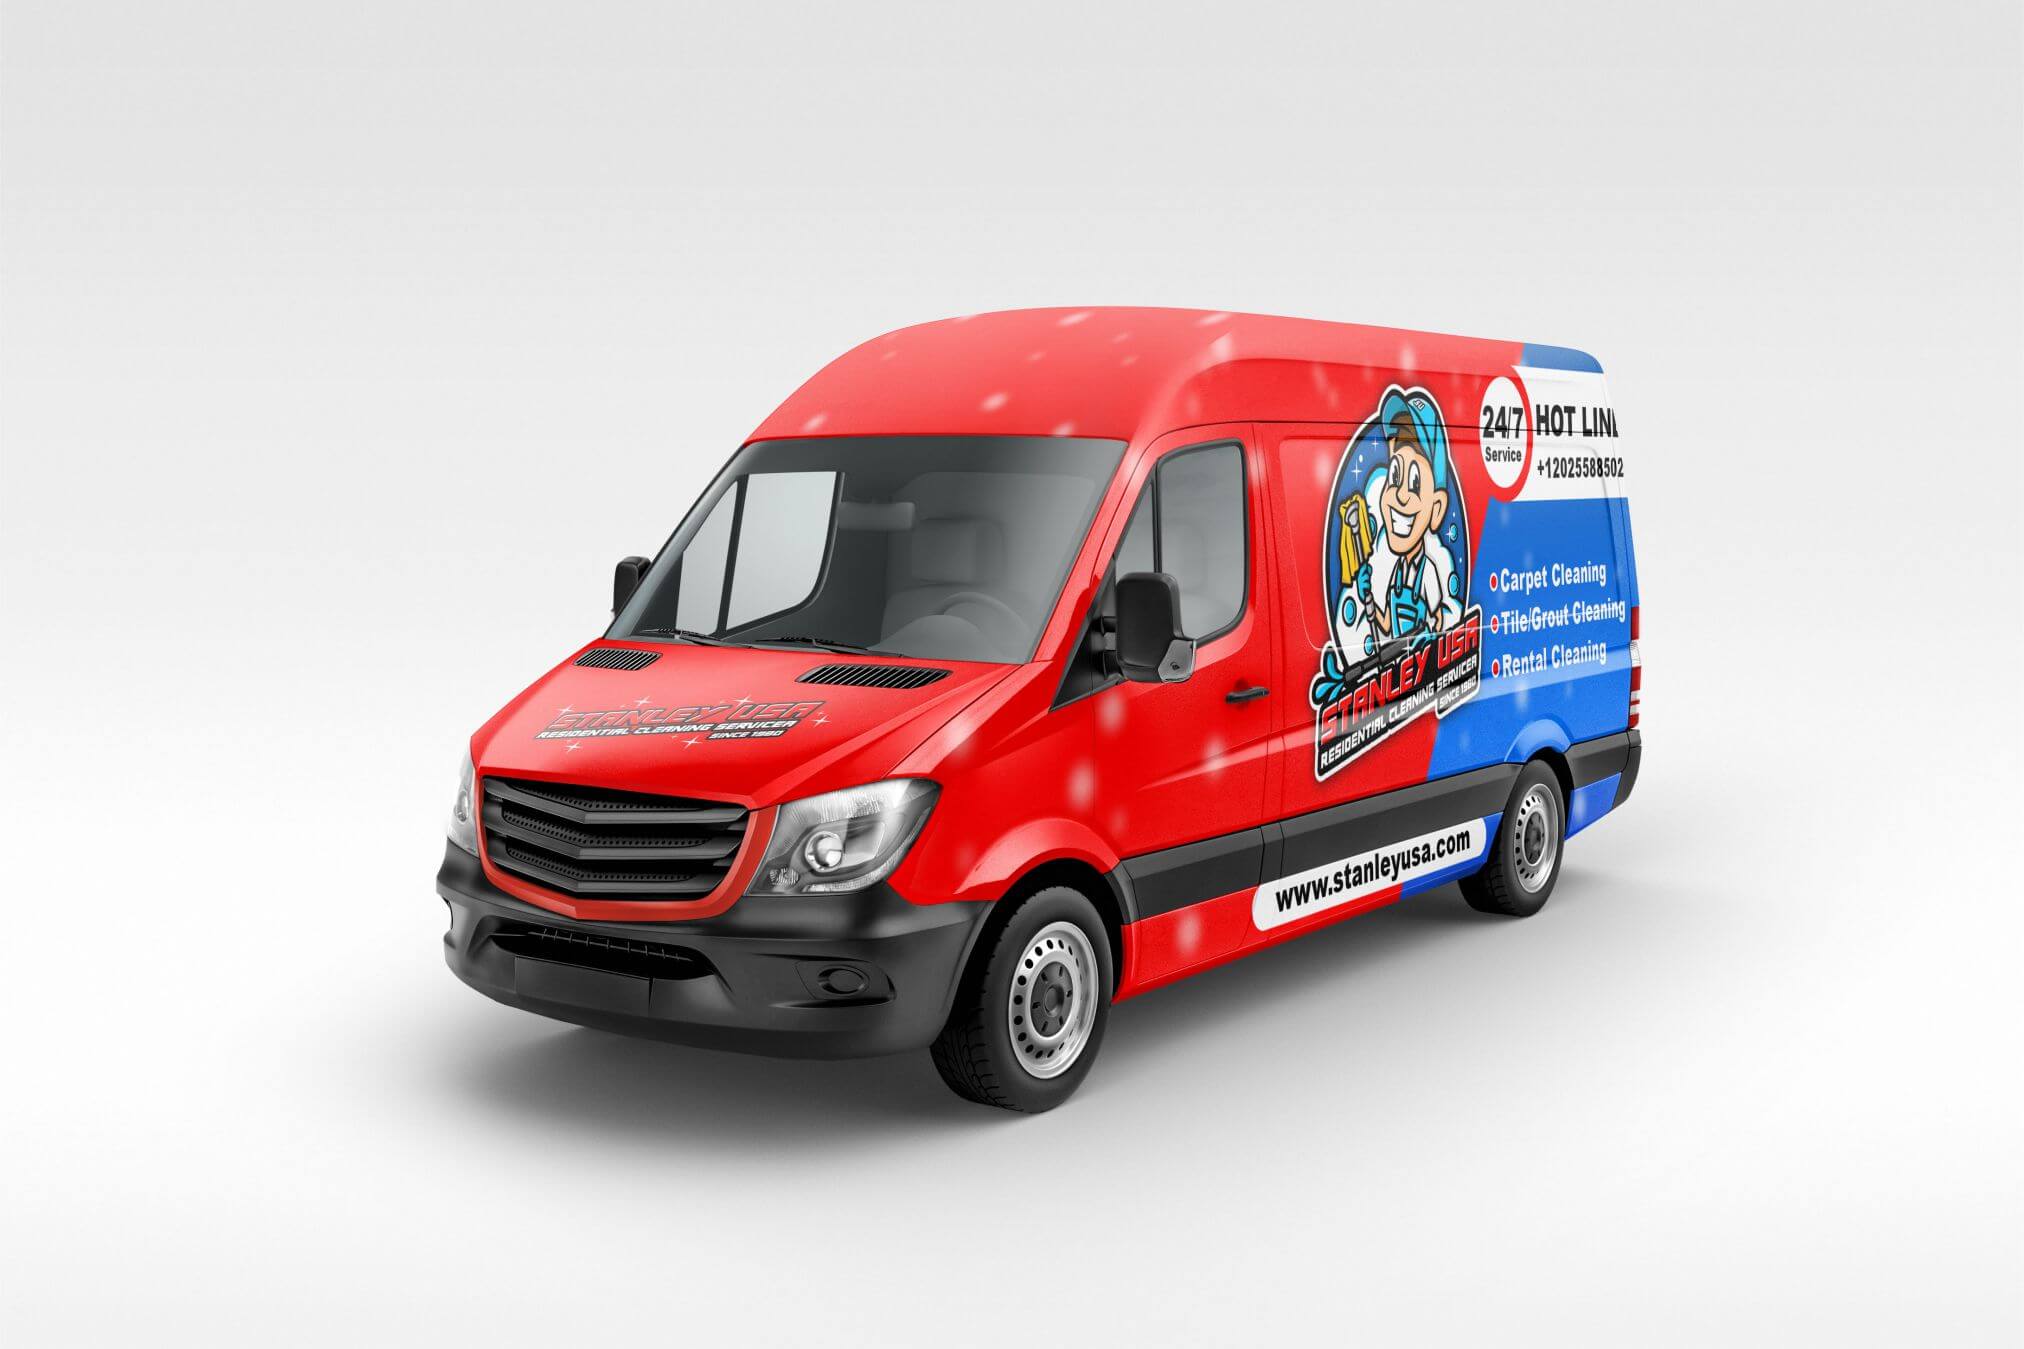 A cartoon mascot logo of a man holding cleaning equipment standing next to a mockup image of a company van.